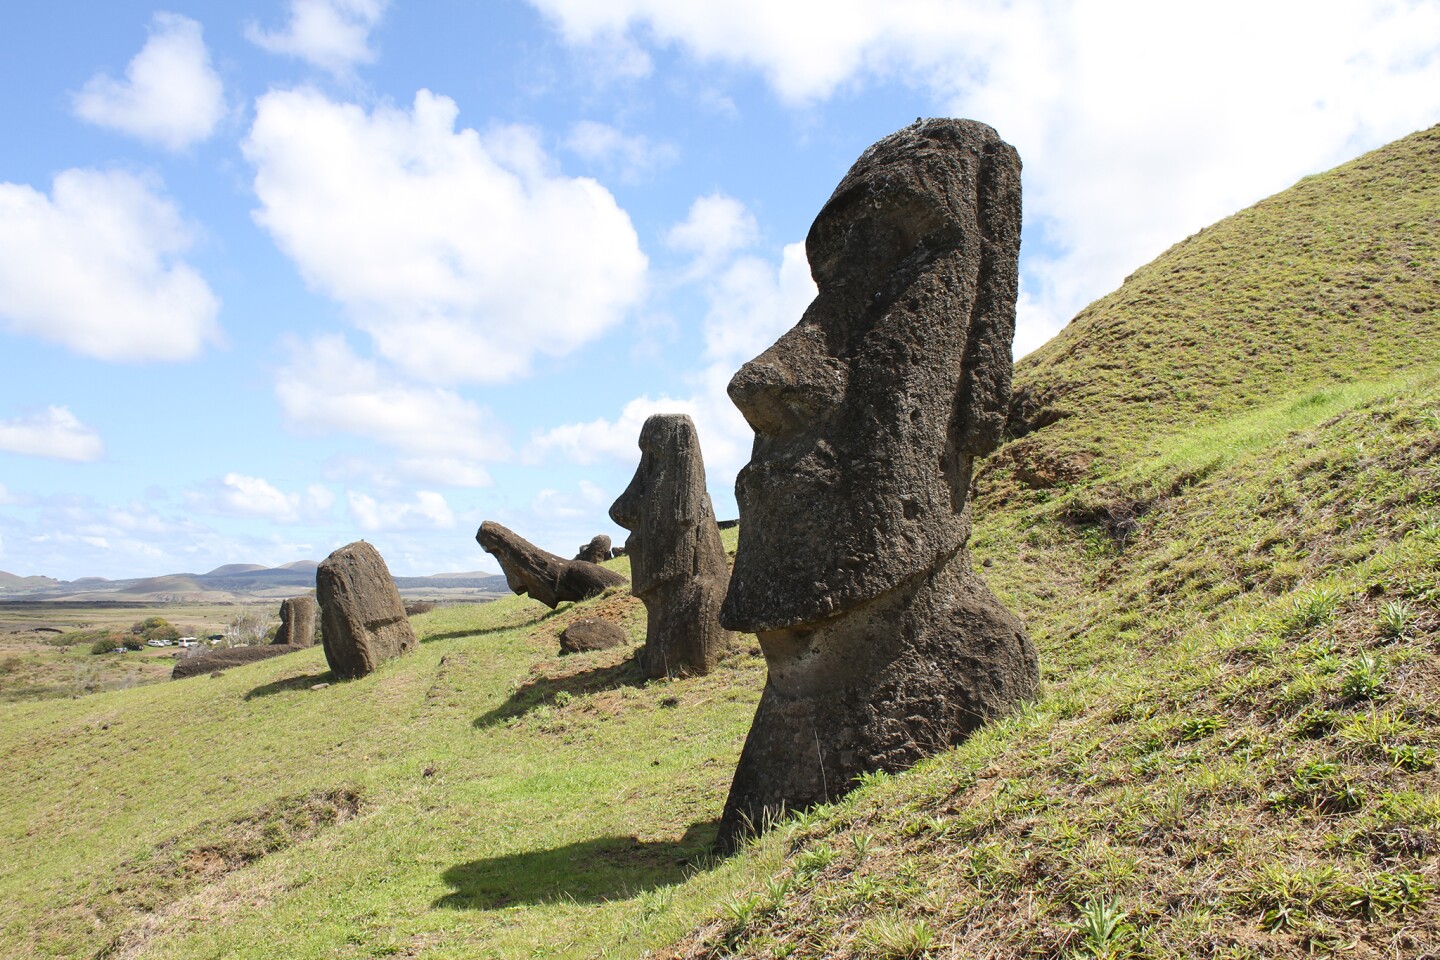 <h2>11. Easter Island</h2> <p><i>Chile</i><br> Located 2,200 miles off the coast of Chile, this remote island was named by 18th-century Dutch explorers who spotted the landmass on Easter Sunday. It’s famous for its approximately 1,000 mammoth statues, which the Indigenous Polynesian inhabitants created from the 10th through 16th centuries to represent their ancestors. <a class="Link" href="https://whc.unesco.org/en/list/715" rel="noopener">Rapa Nui National Park</a>, which covers half of Easter Island, is the best place to see the carved figures, or <i>moai</i>. There are about 400 moai at the ancient quarry Rano Raraku, including a 70-foot-tall statue that was never raised upright. The most famous site, Tongariki, features 15 moai beside the ocean. Made from a soft volcanic rock called tuff, the monuments are vulnerable to the elements, and archaeologists believe one day they may disappear.<br> </p> <h3>How to visit</h3> <p> Latam operates two daily flights from Santiago de Chile to Hanga Roa, Easter Island’s capital. The trip takes about 5.5 hours. The entrance fee to Rapa Nui National Park is $80 for adults, $40 for children.</p>